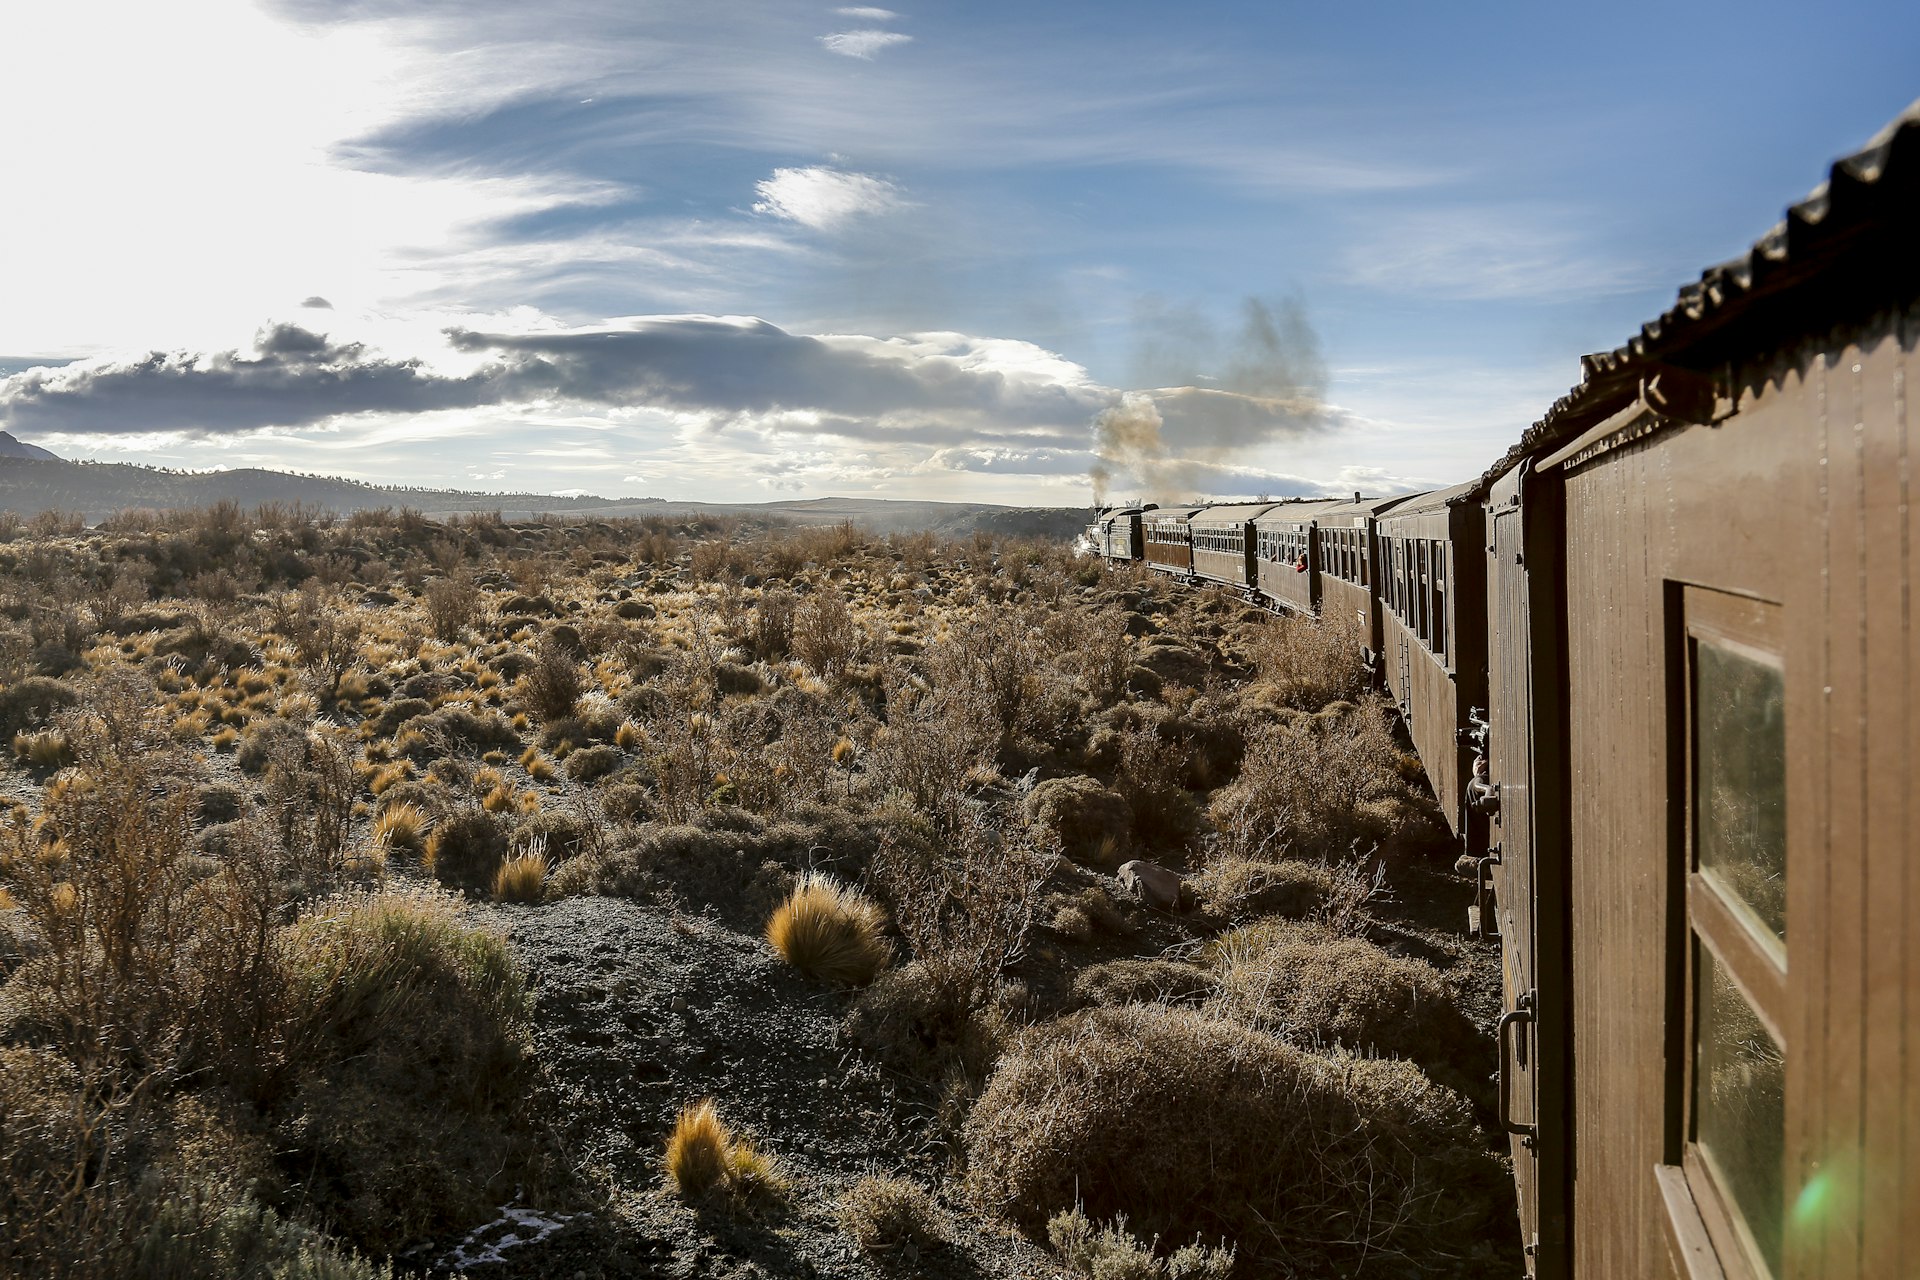 The Patagonia countryside as seen by The Old Patagonian Express steam train, which bends around to the left, curling towards the scrub and shrubs and big rocks.